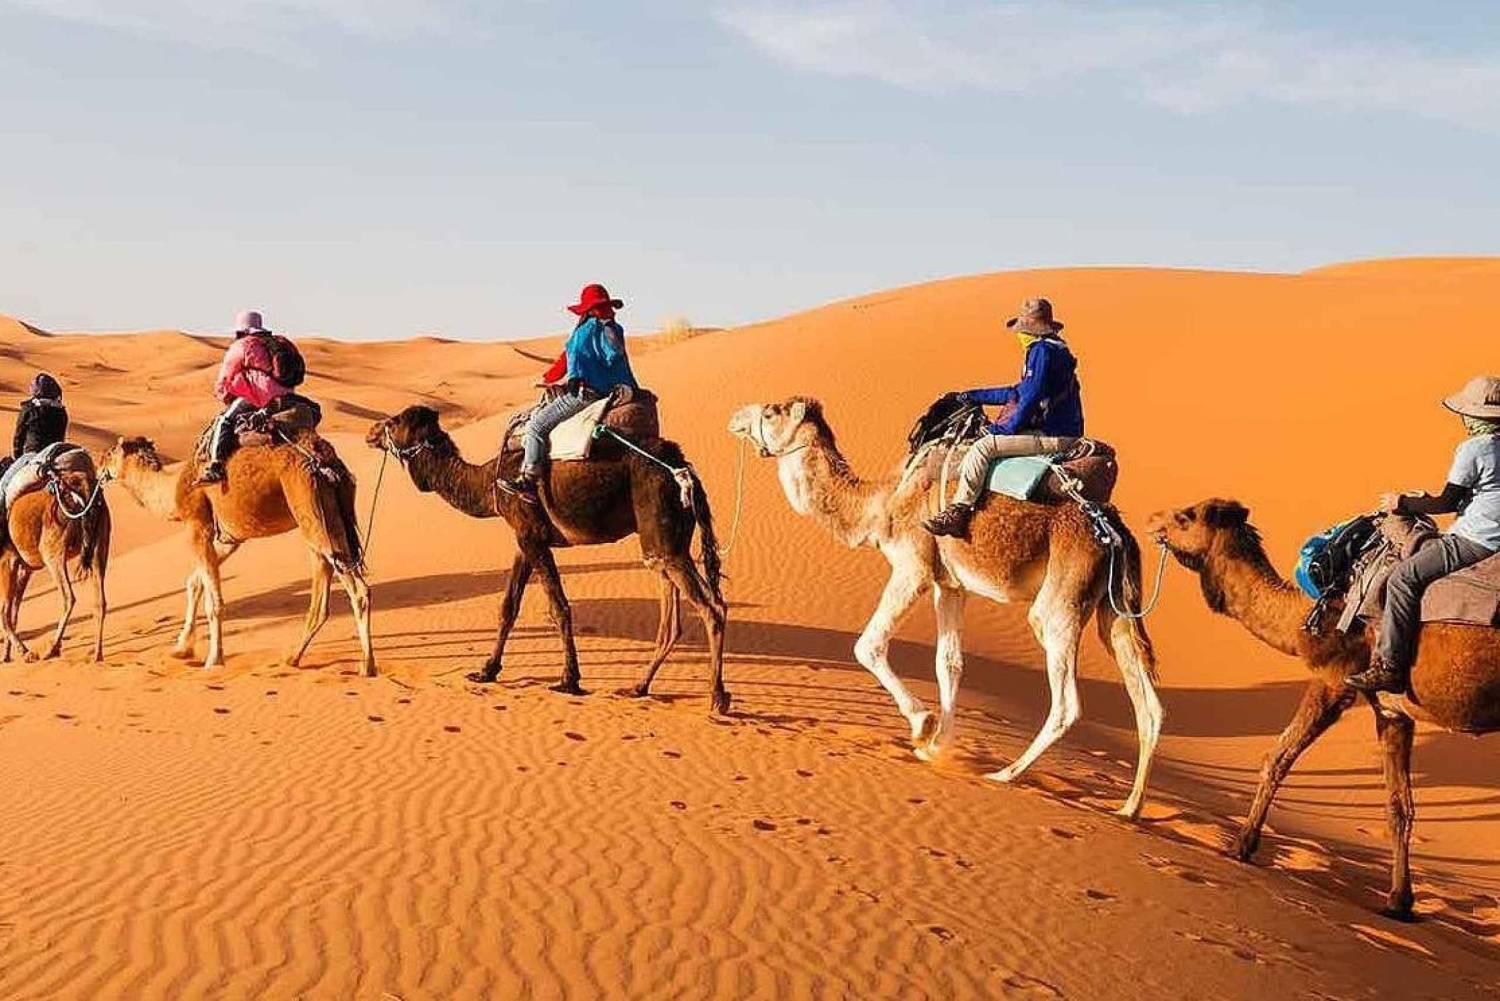 From Marrakech: 3-Day Desert Trip to Fes with Luxury Camp